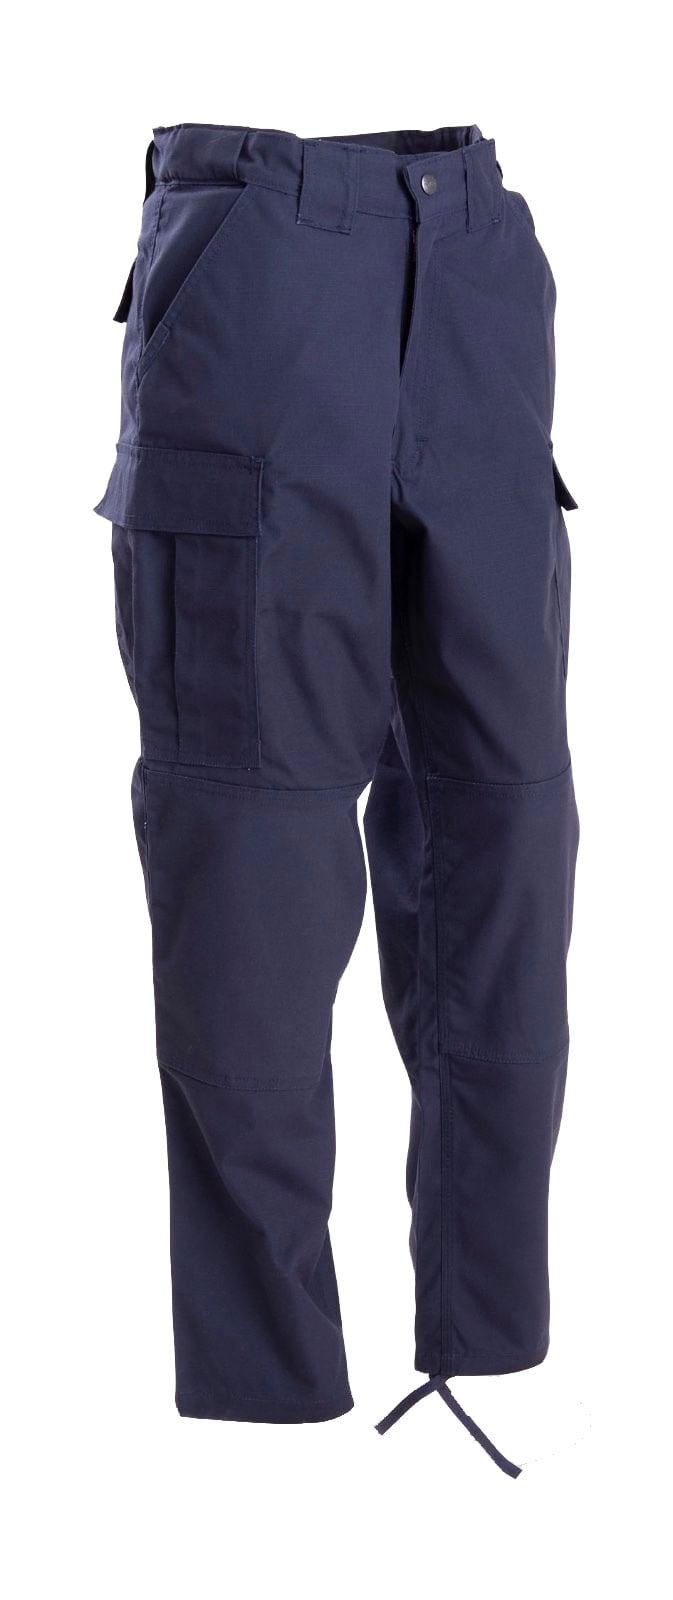 Click Traders Newark Polycotton Cargo Combat Work Trousers Pants Knee Pad Pocket 